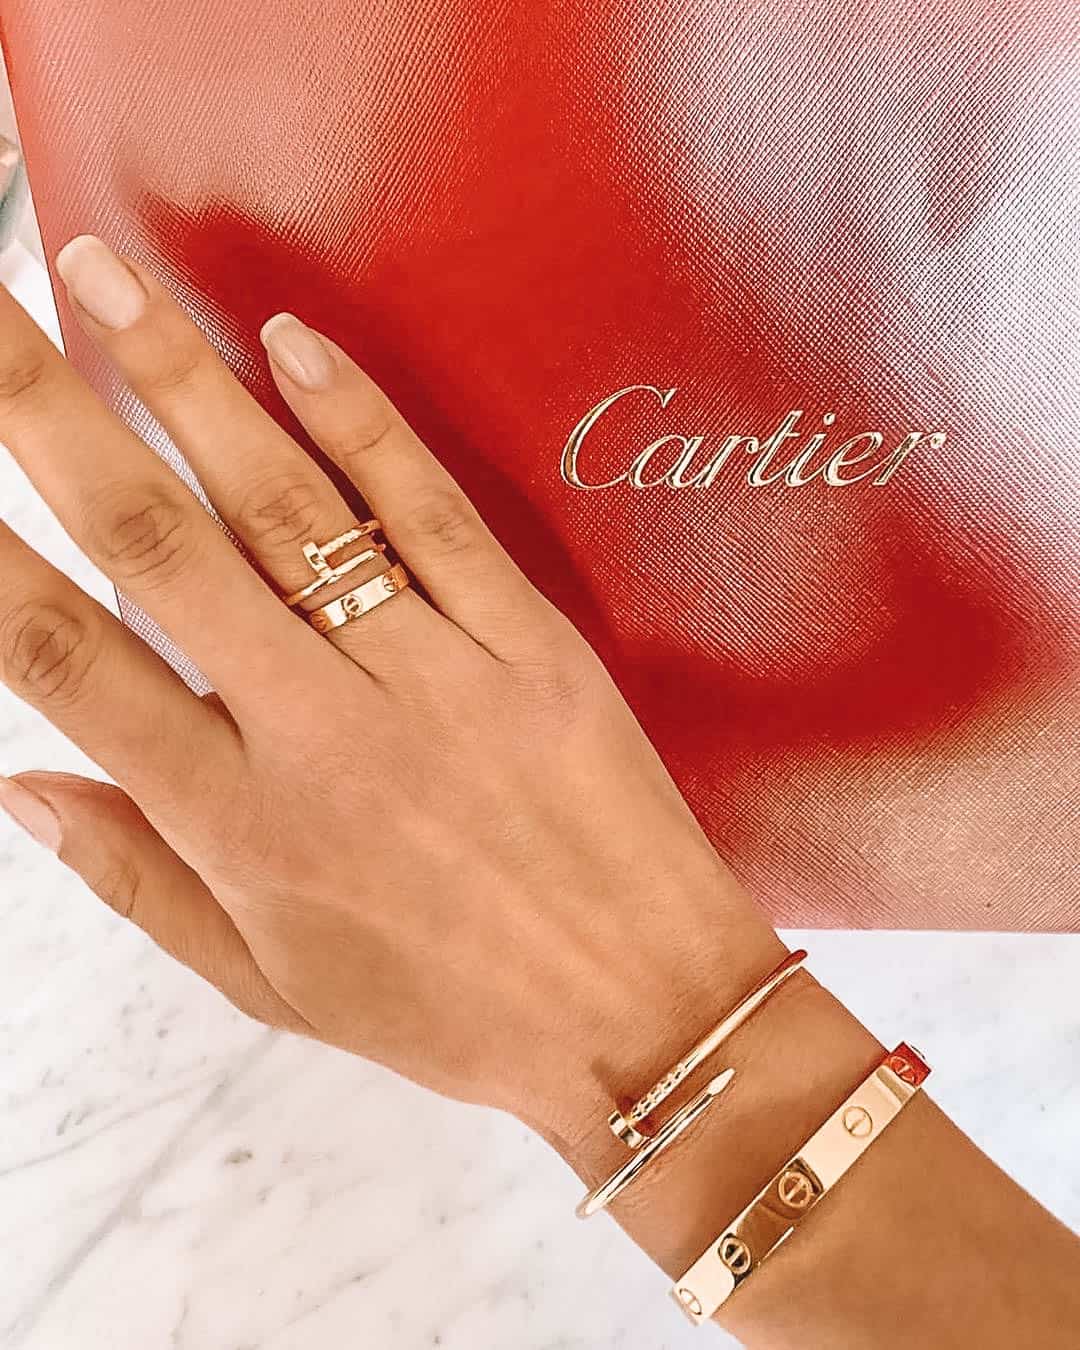 the cartier ring